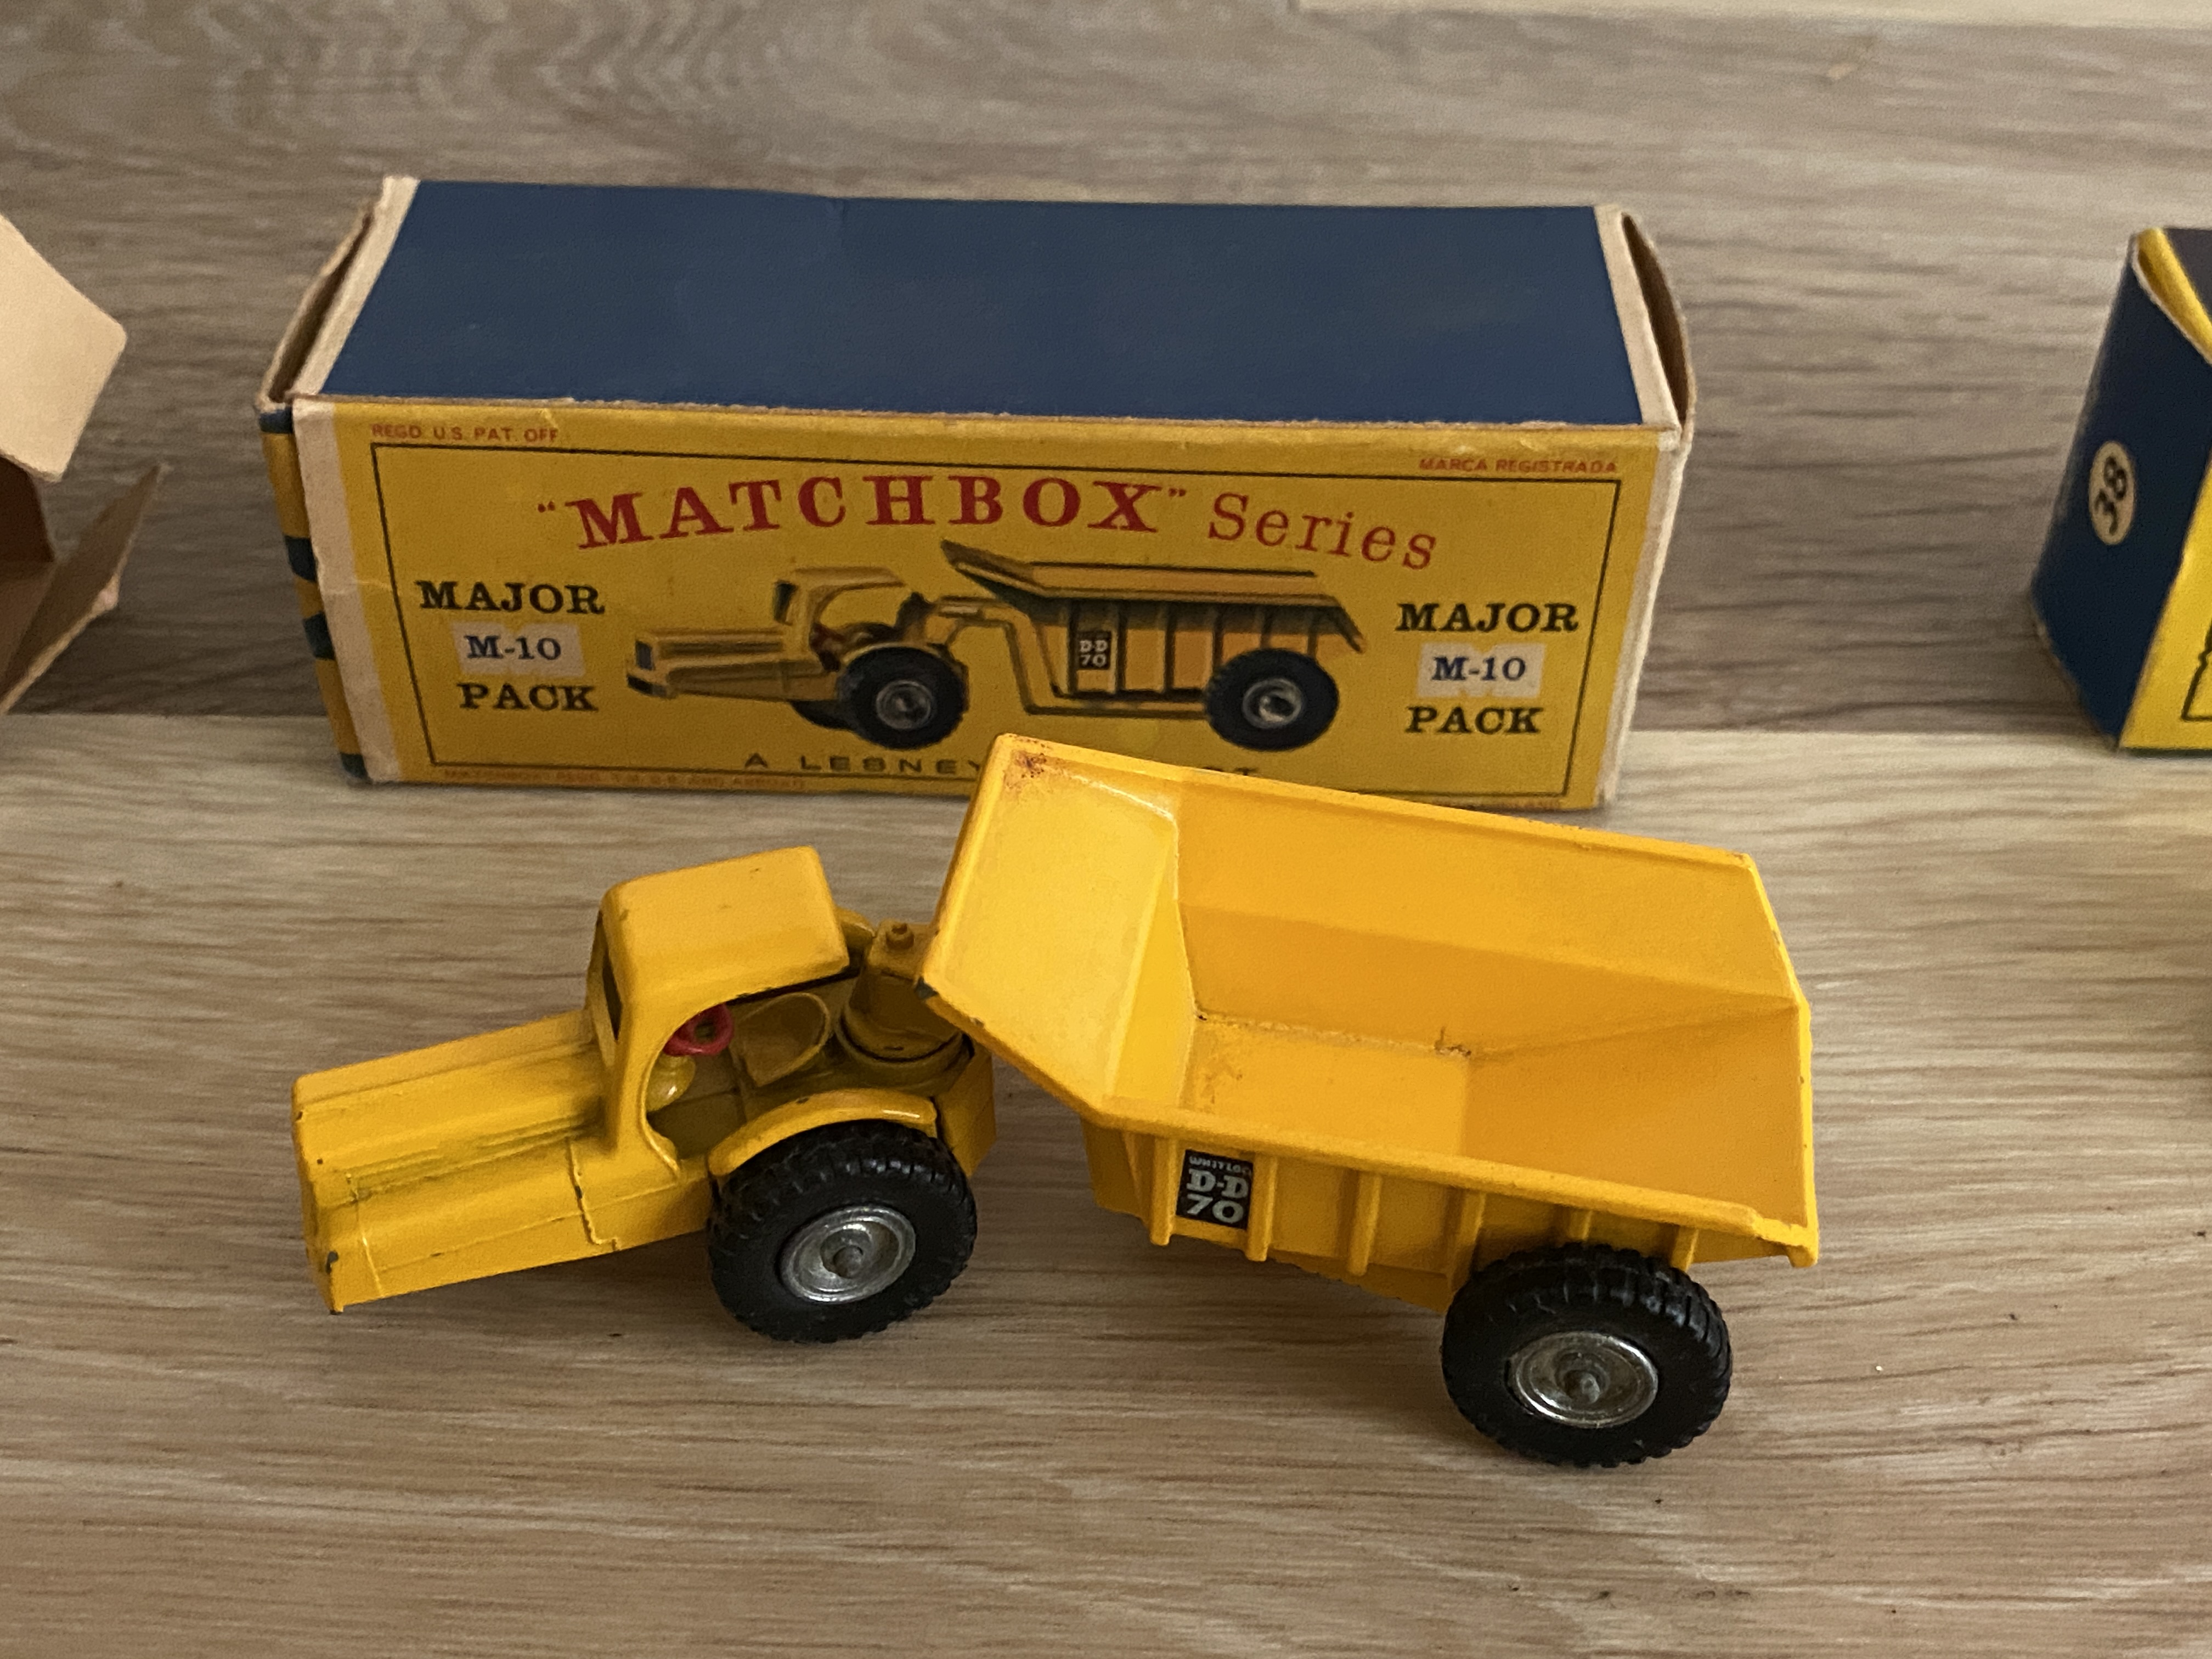 Boxed Vintage Matchbox Toy Models, good condition - Image 4 of 10